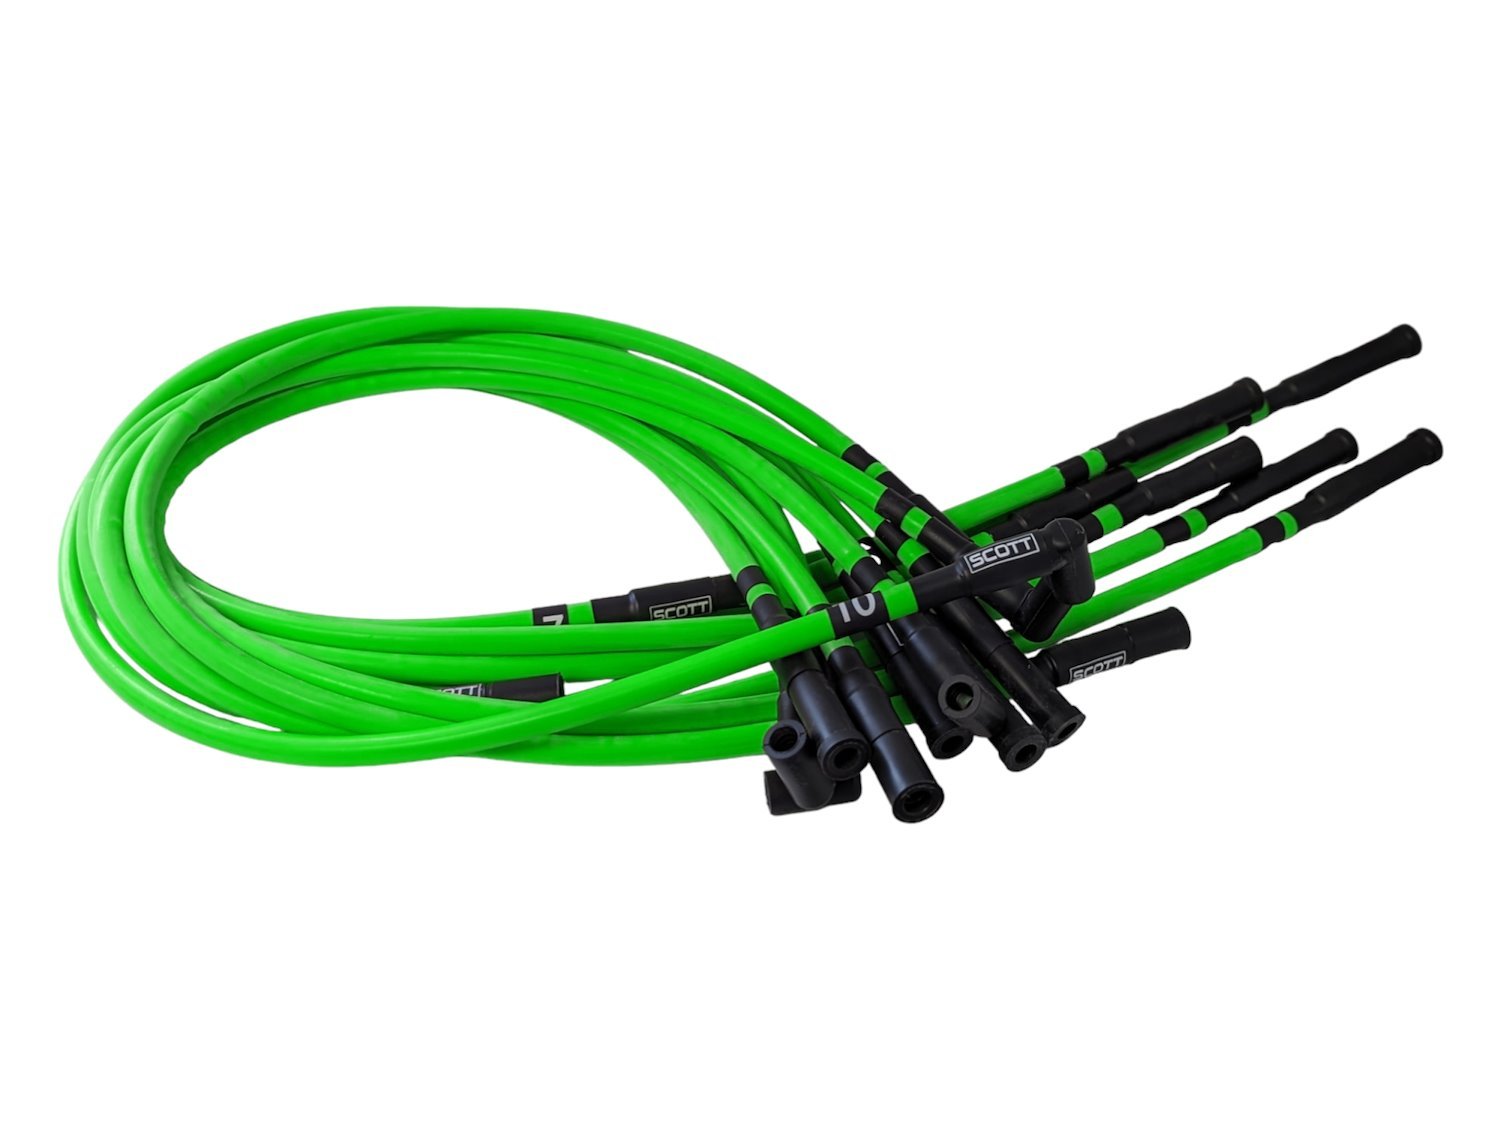 SPW-CH-690-I-8 High-Performance Silicone-Sleeved Spark Plug Wire Set for Dodge Viper (Gen-1) [Fluorescent Green]